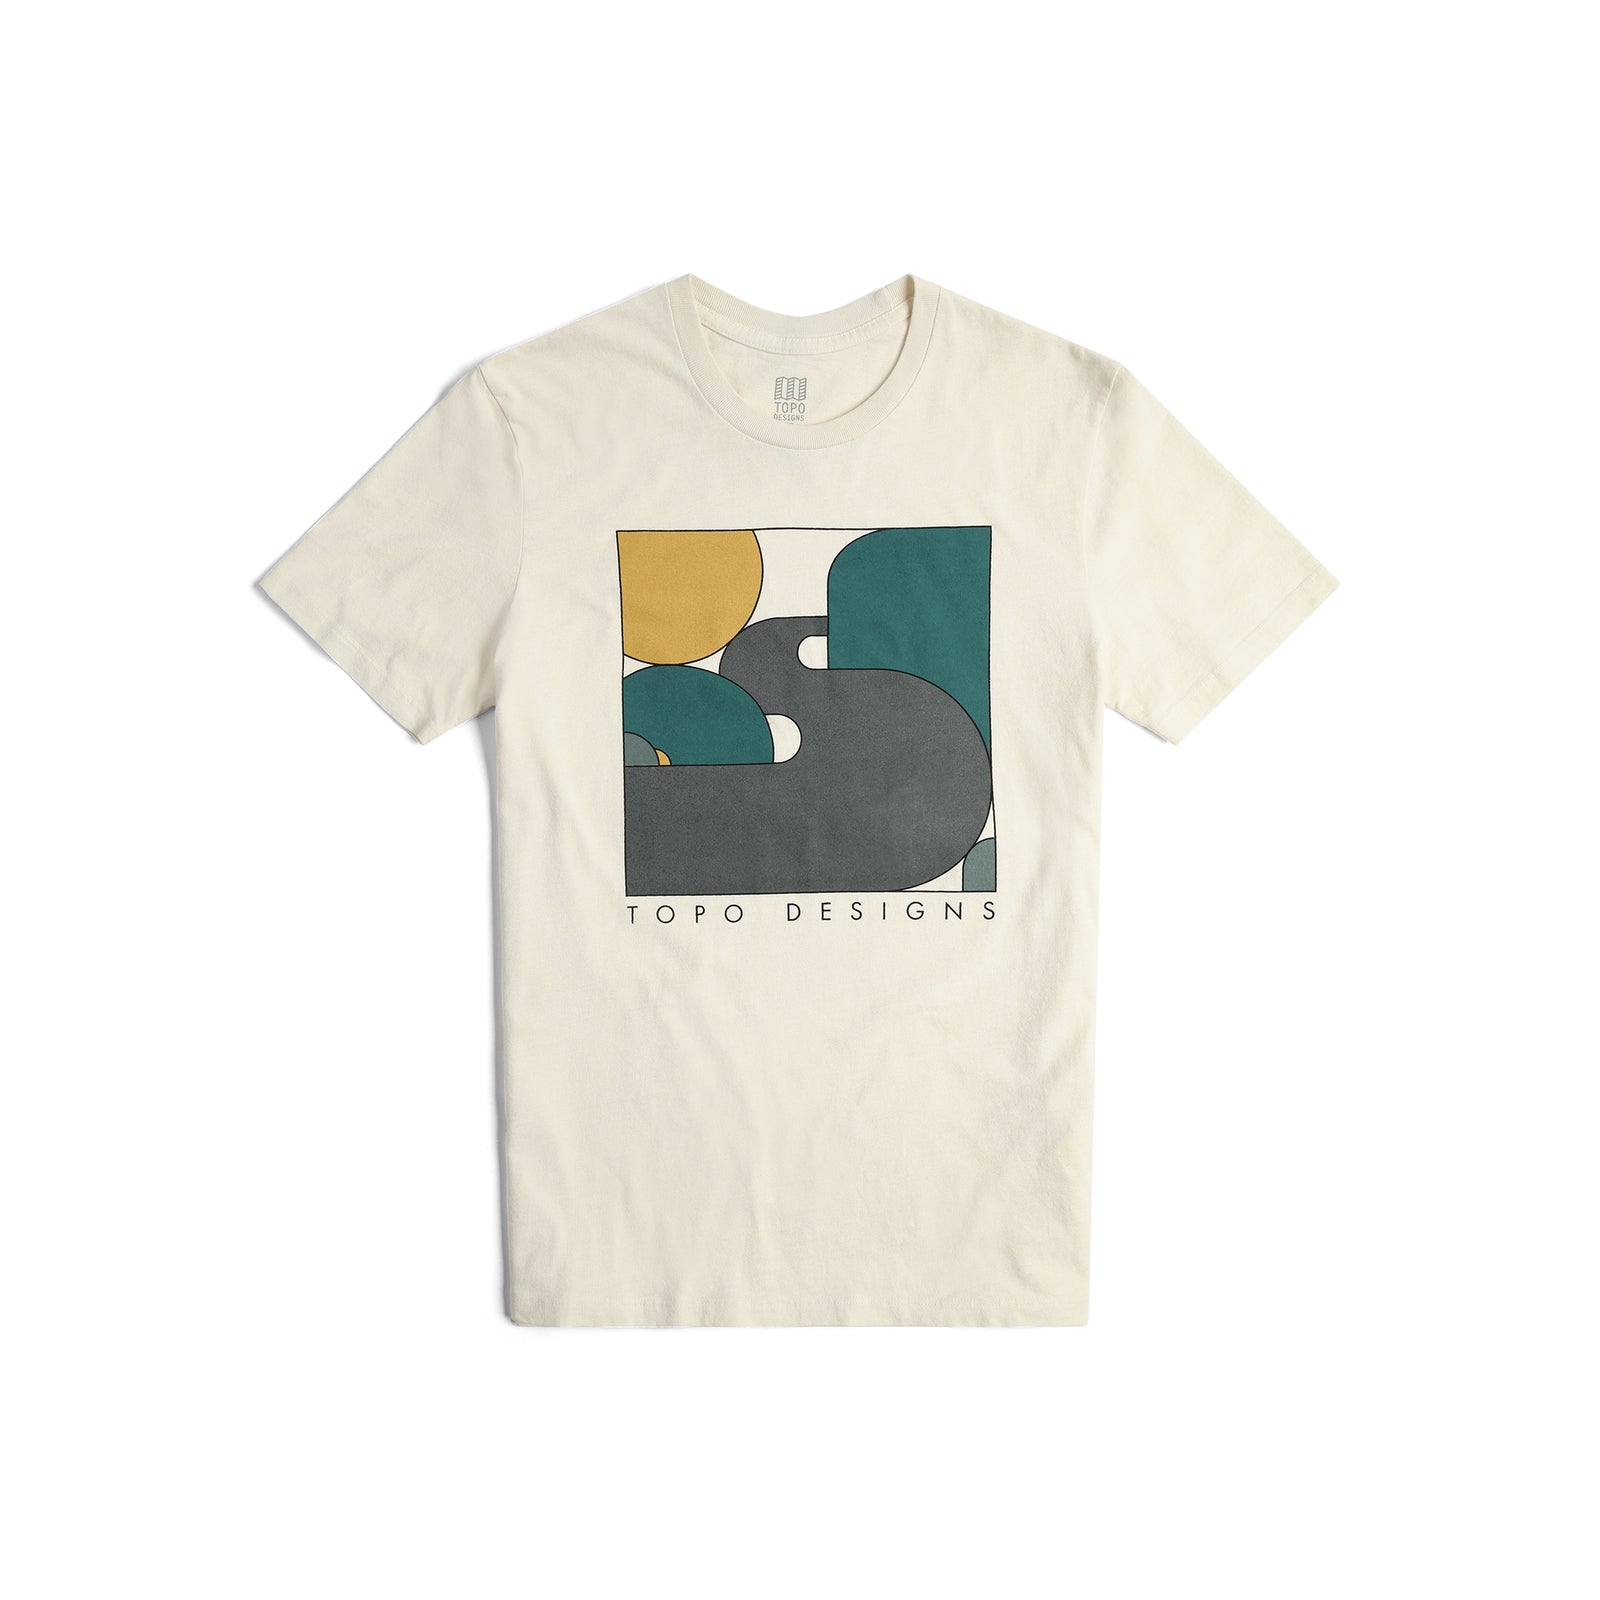 Front View of Topo Designs Toposcape Tee - Men's in "Natural"